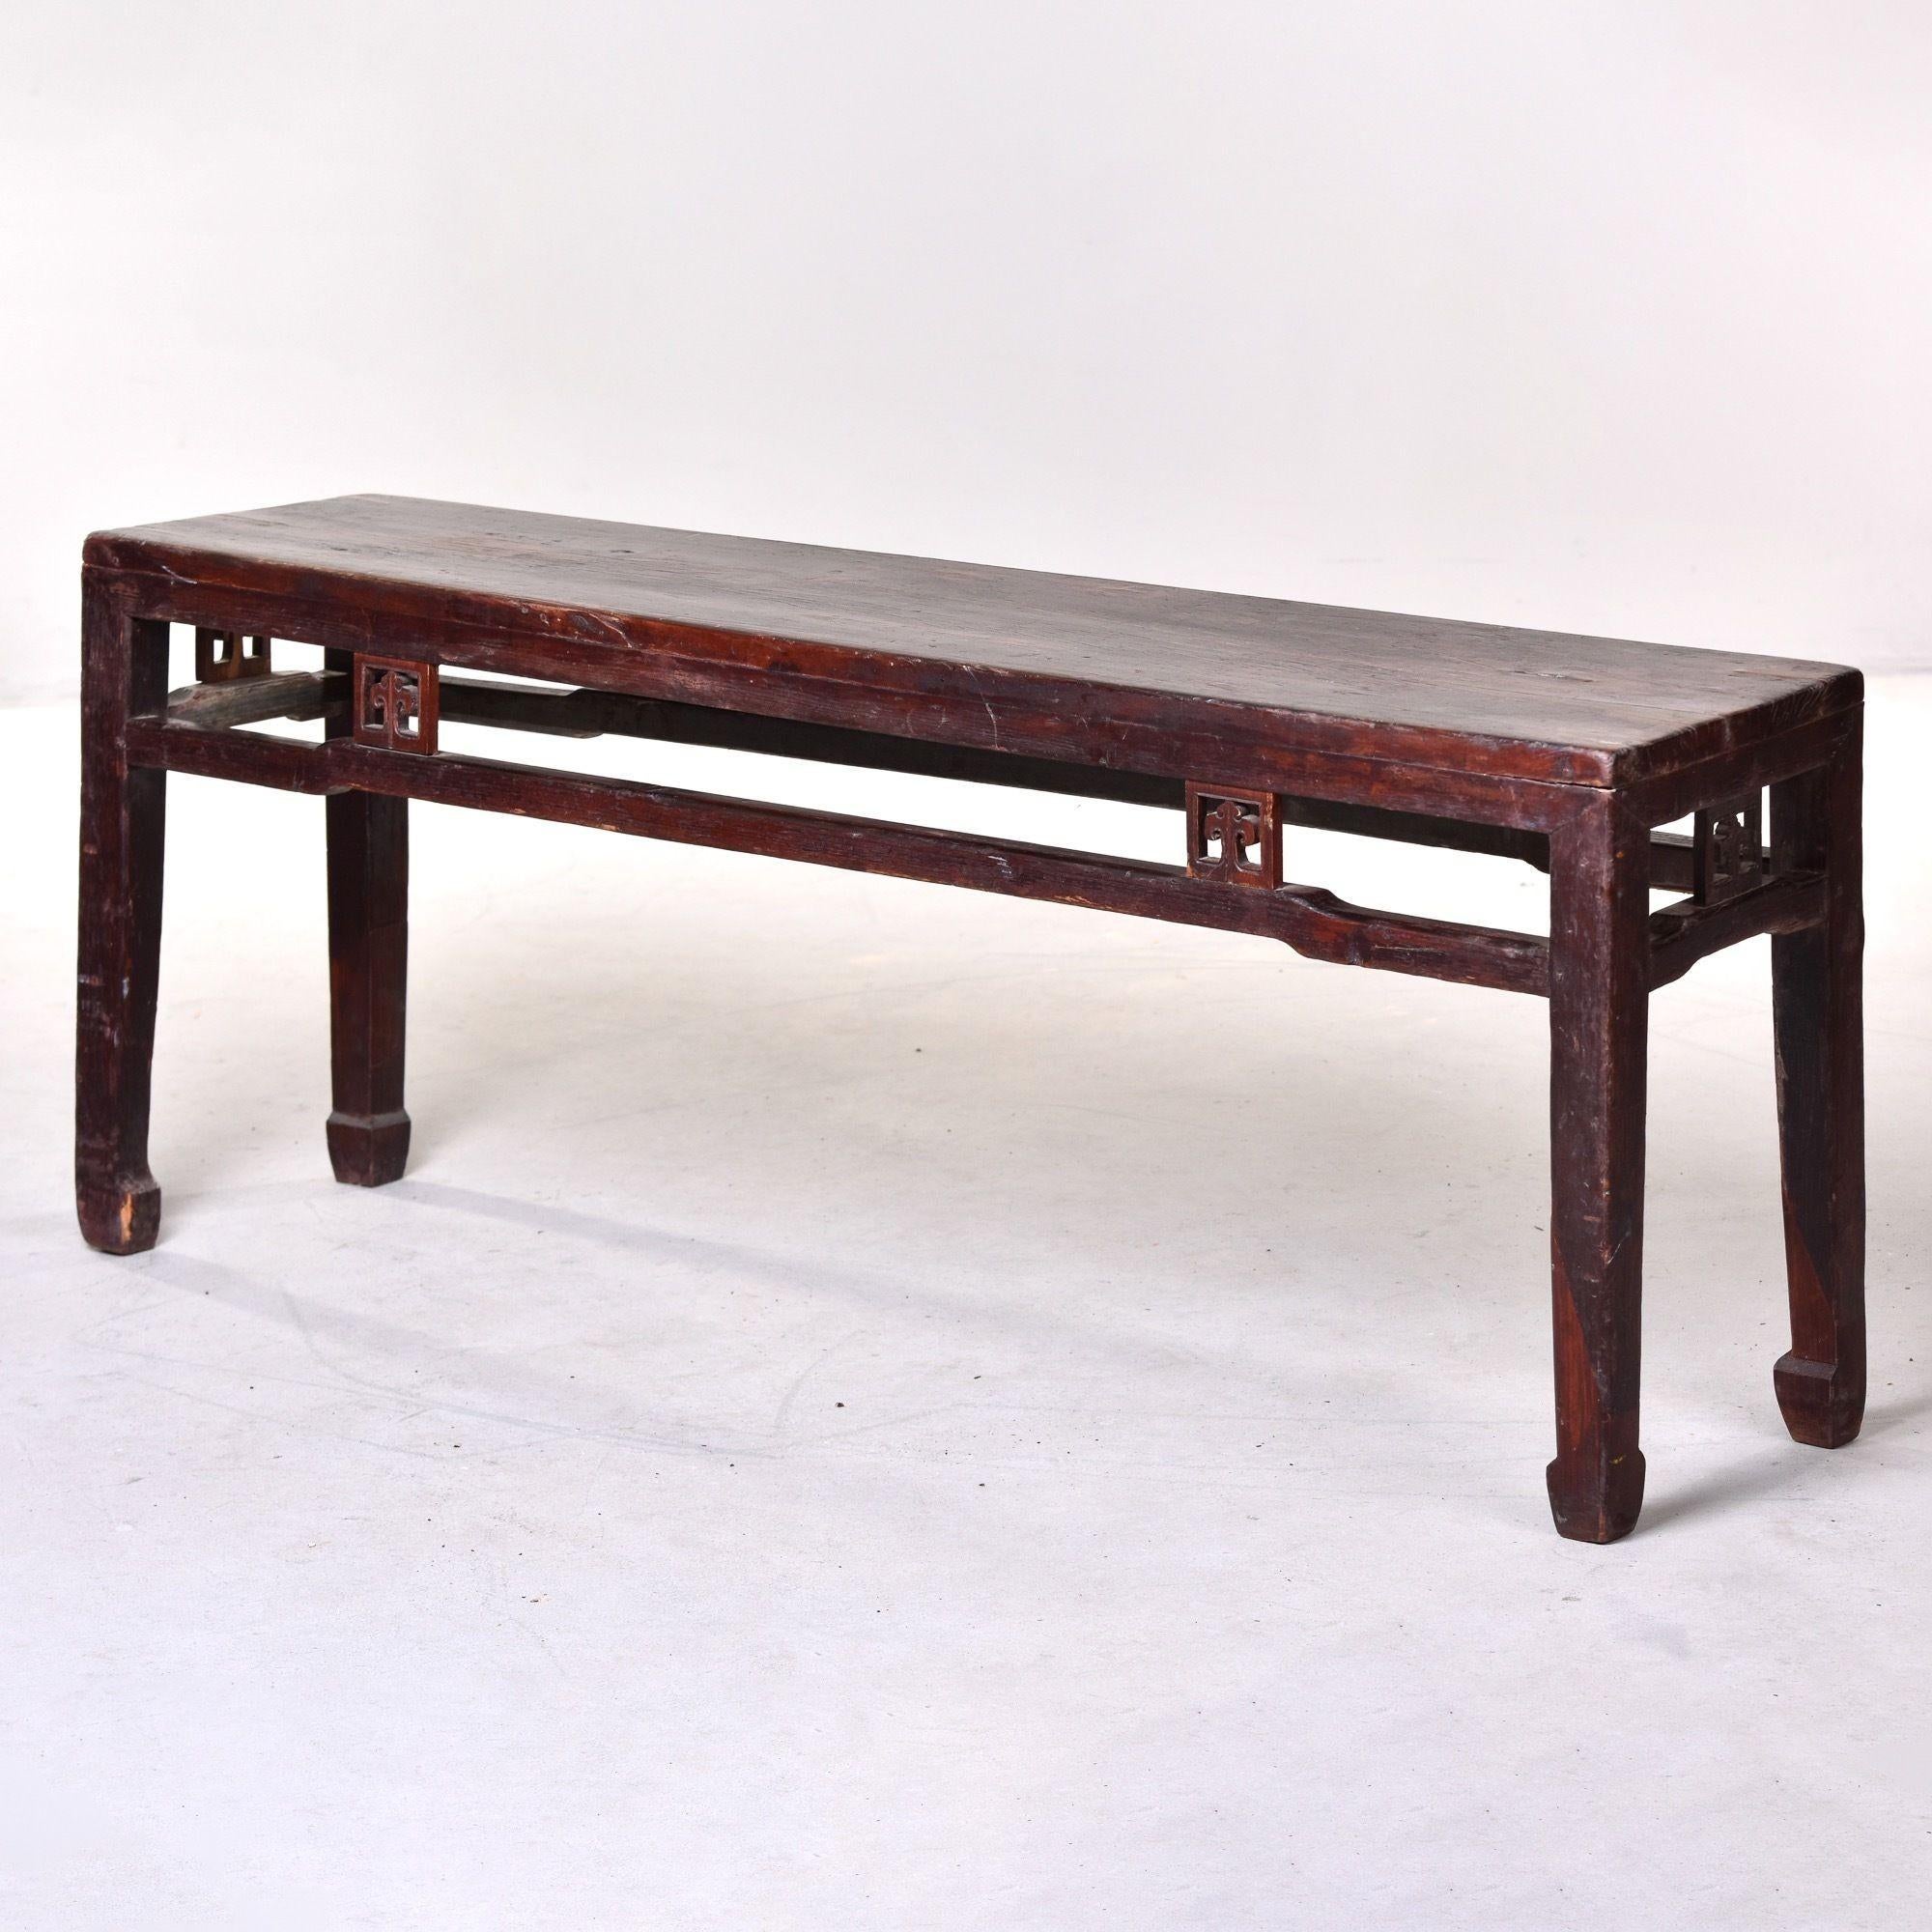 Early 20th C Extra Long Chinese Elm Wood Dong Yang Bench 6